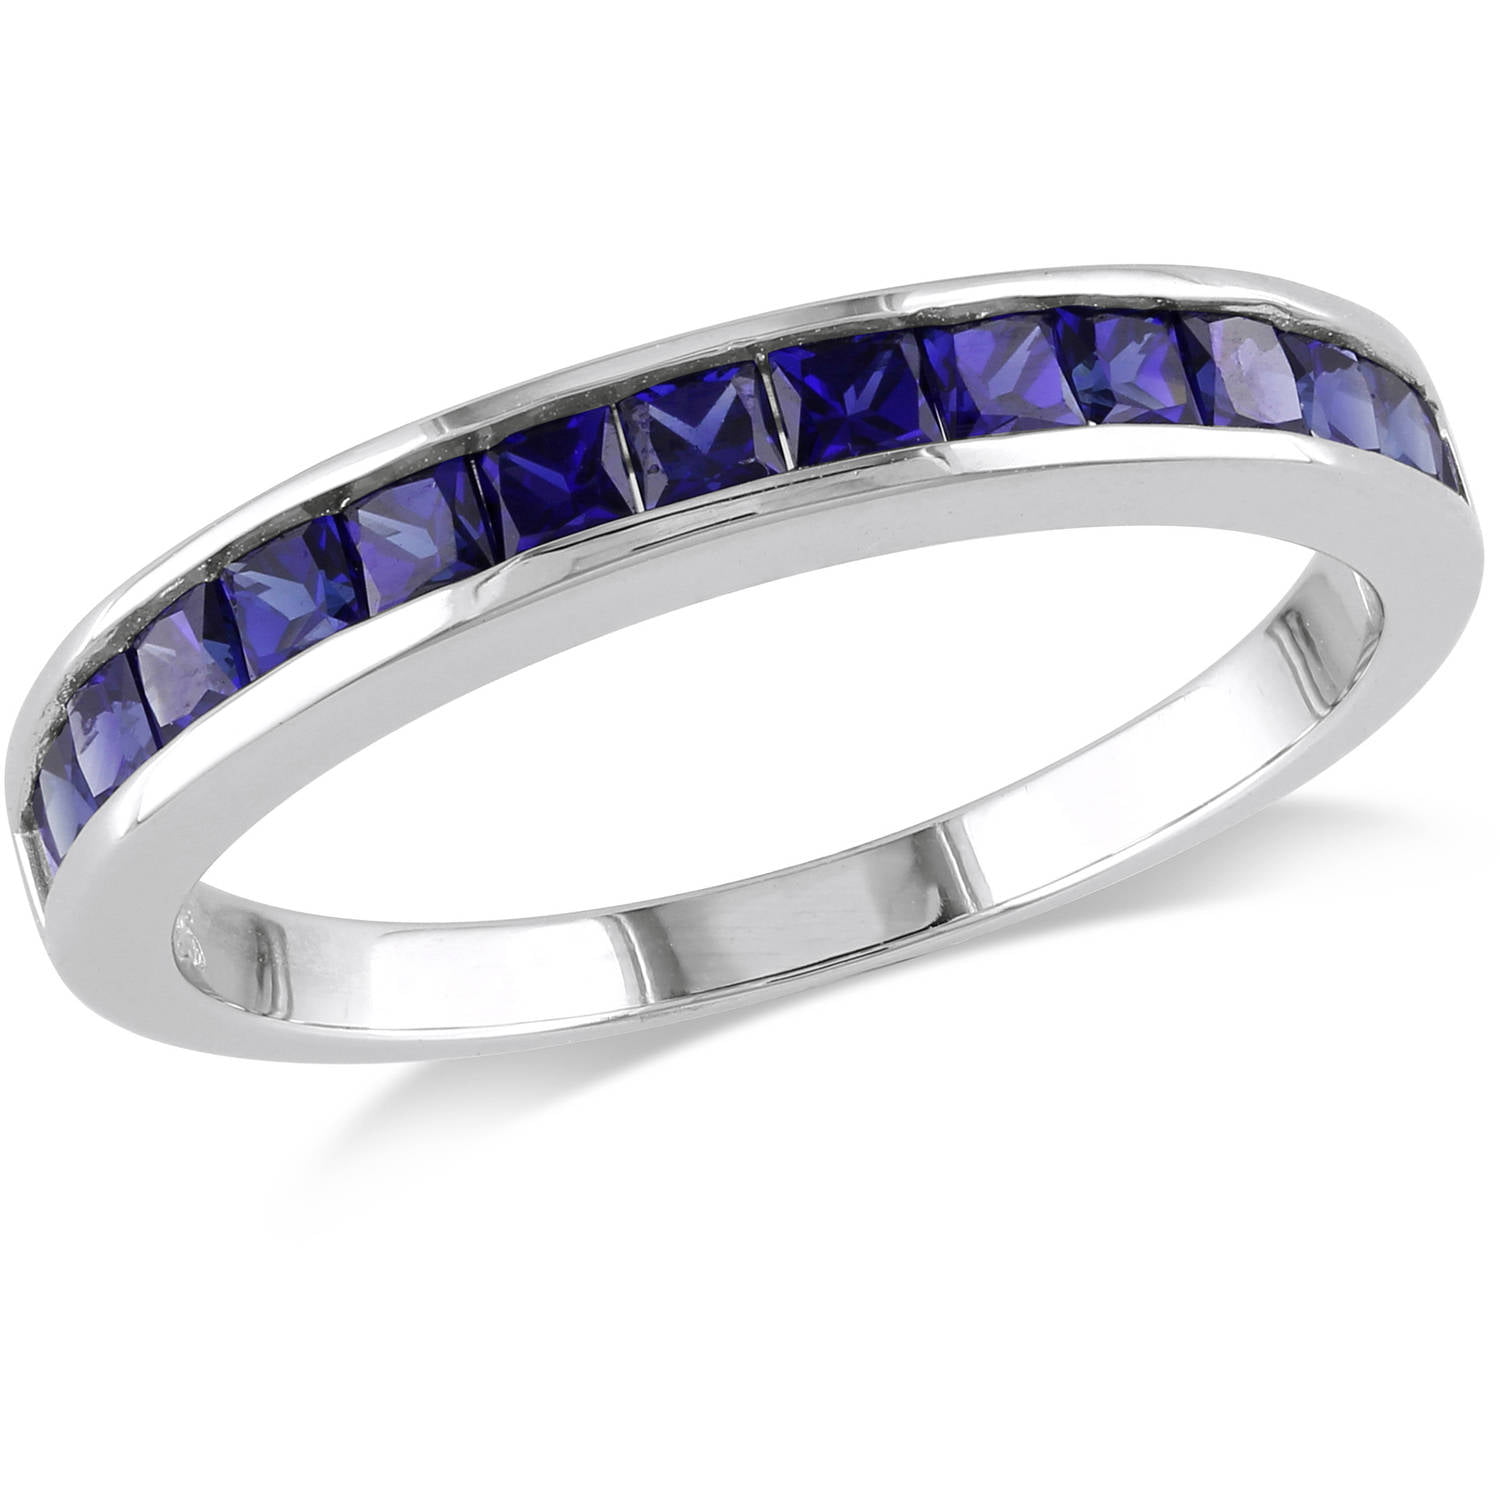 Princess Blue Sapphire Eternity Wedding Band .925 Sterling Silver Ring Size 4-12 